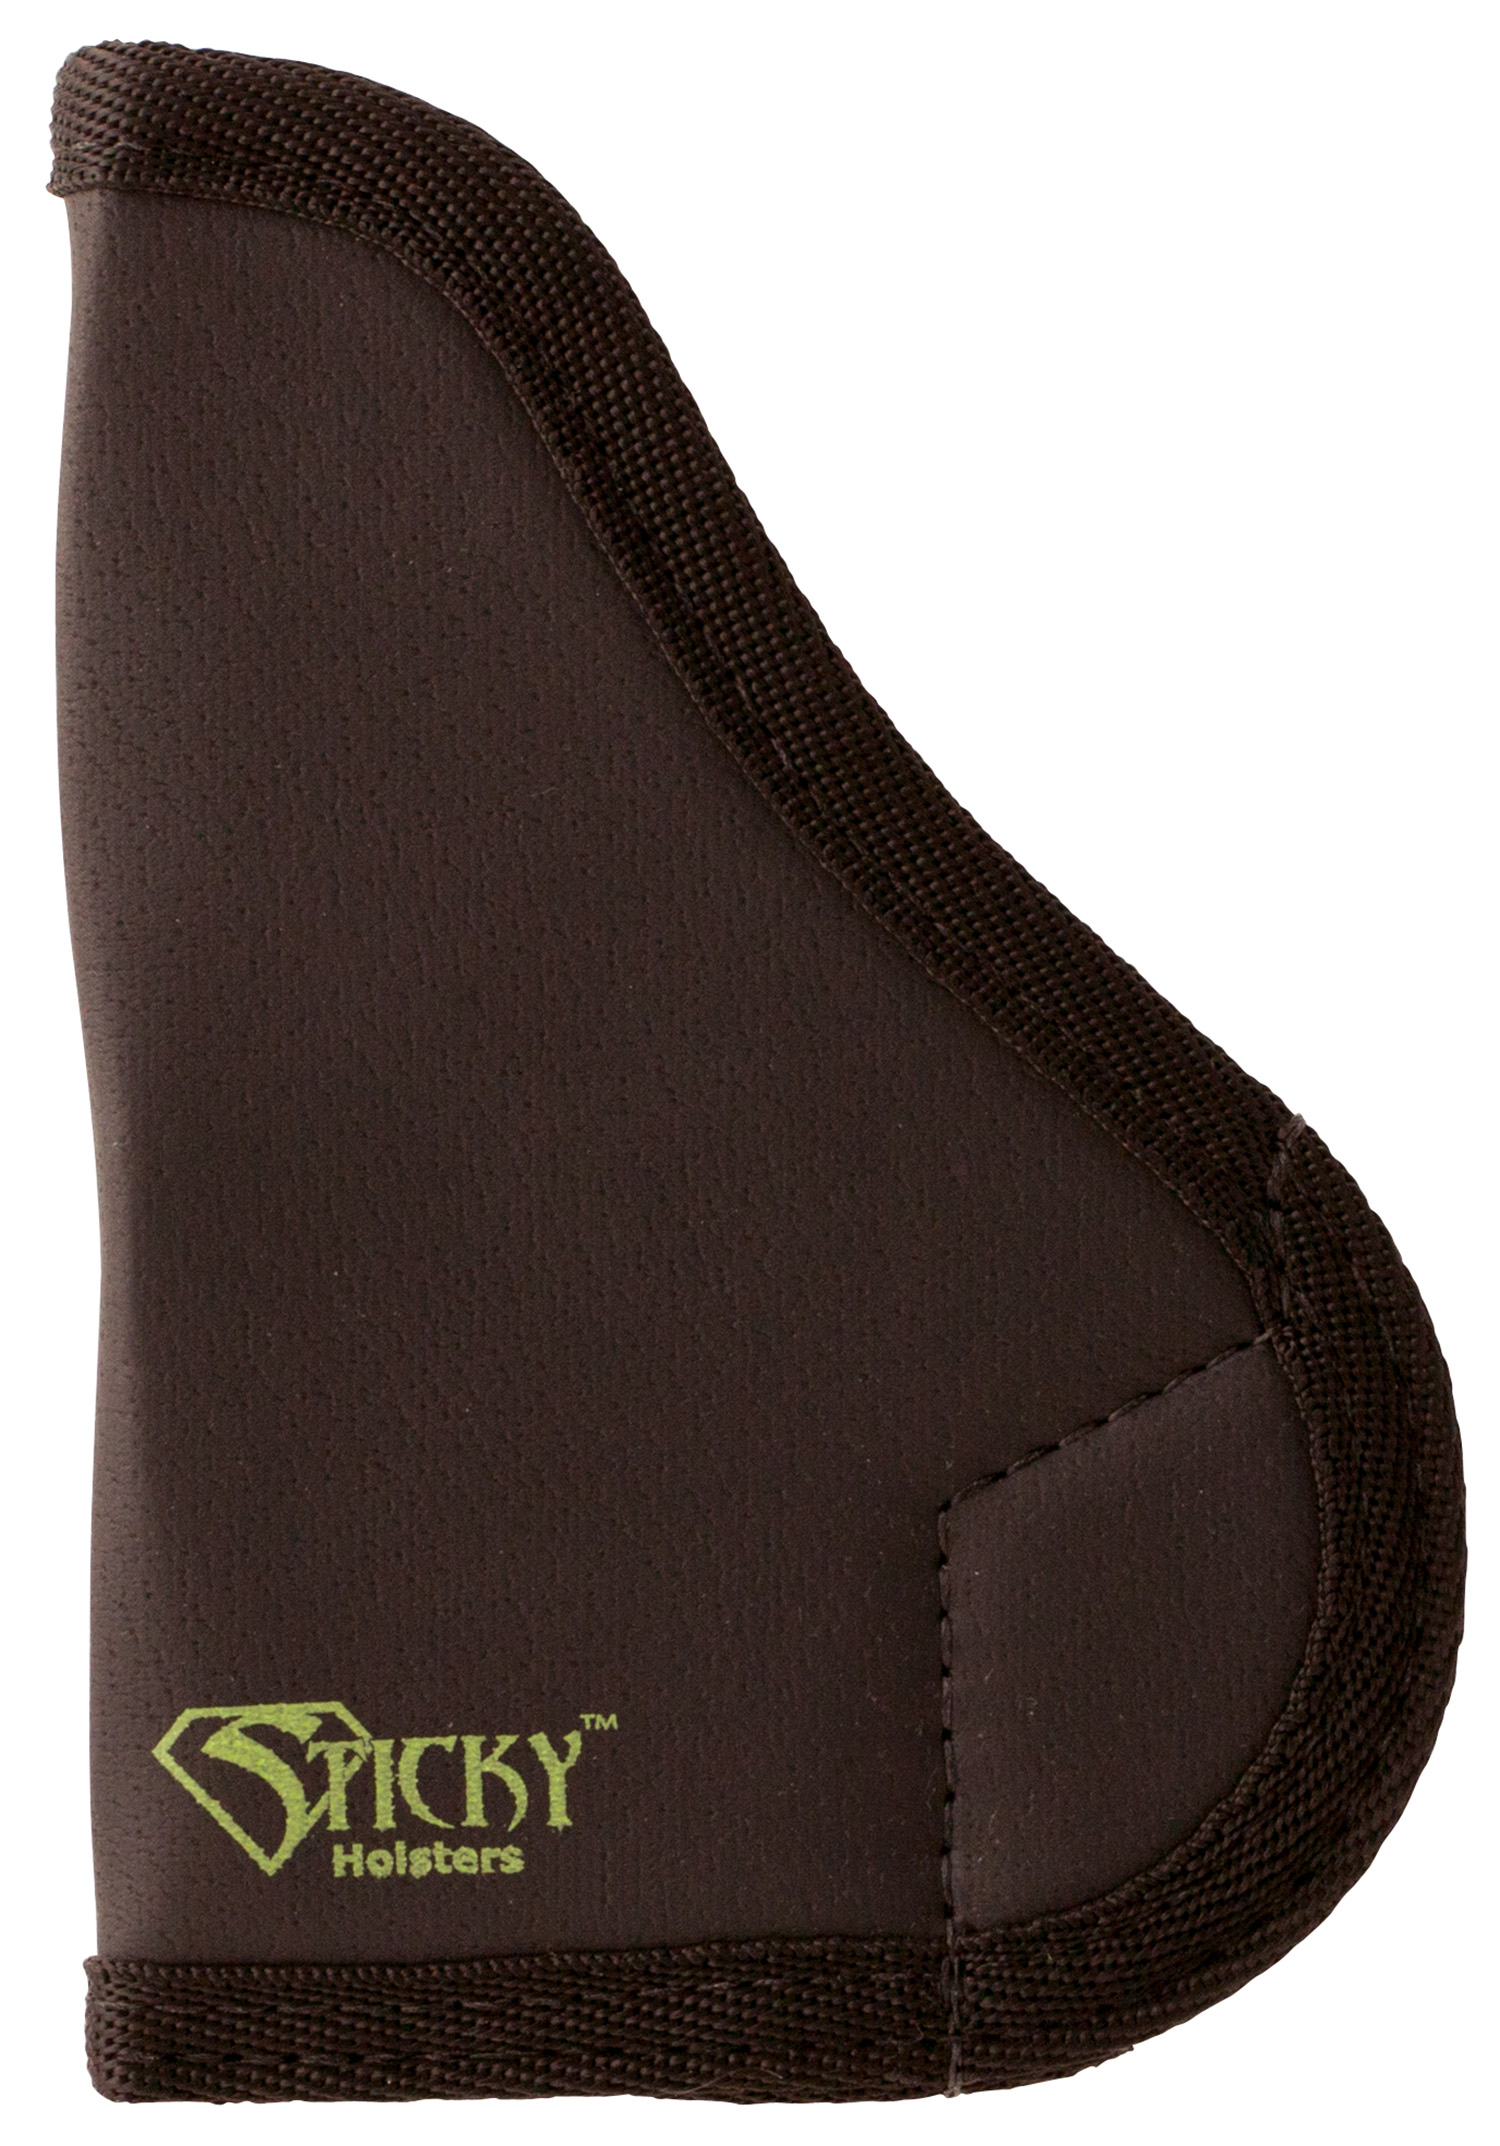 STICKY HOLSTERS SINGLE STACK SUB-COMP UP TO 3.6